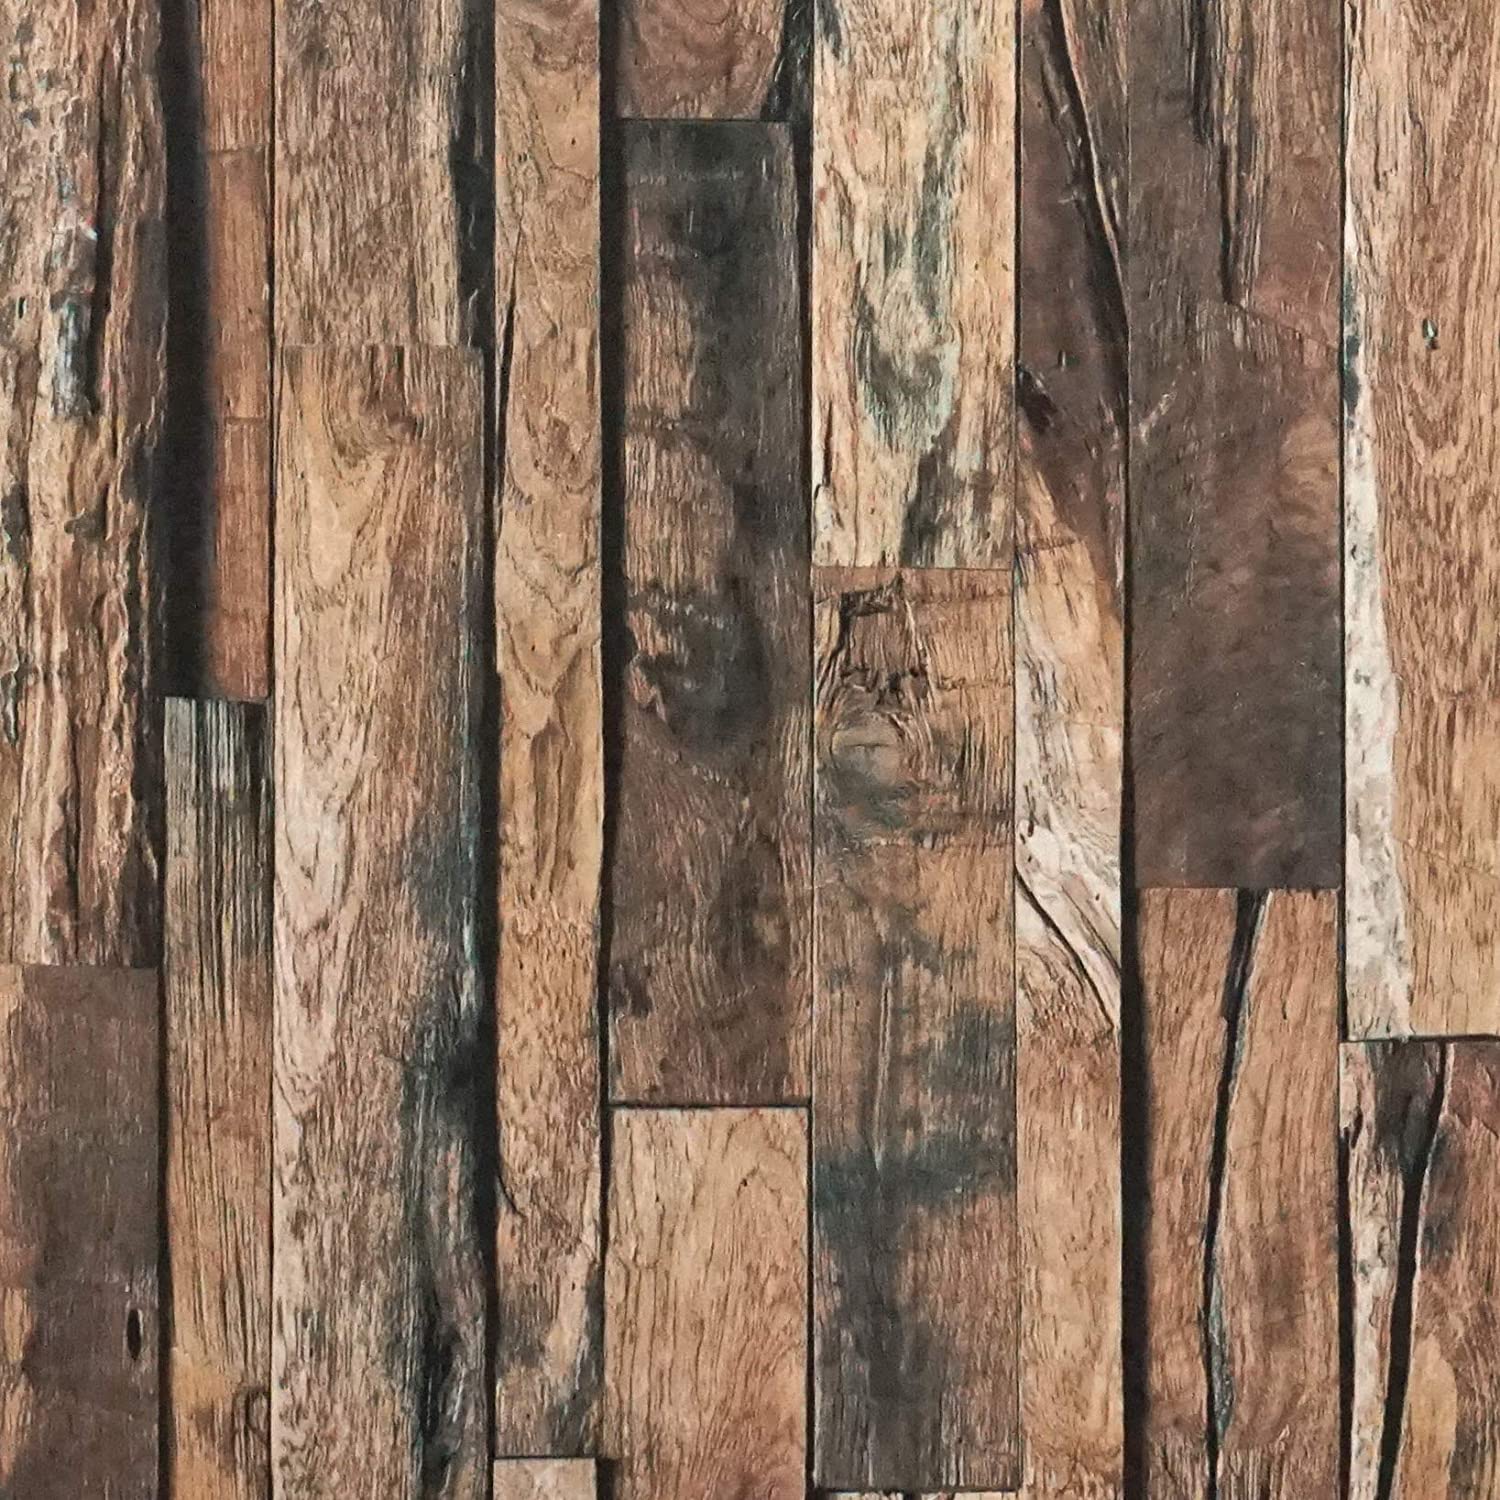 Buy Reclaimed Wood Contact Paper Rustic Wallpaper Wood Peel and Stick Wallpaper Removable Distressed Faux Wood Plank Wallpaper Self Adhesive Decorative Vinyl Film Shelf Drawer Liner Roll 17.7x78.7 Online in Turkey. B07QPFC813